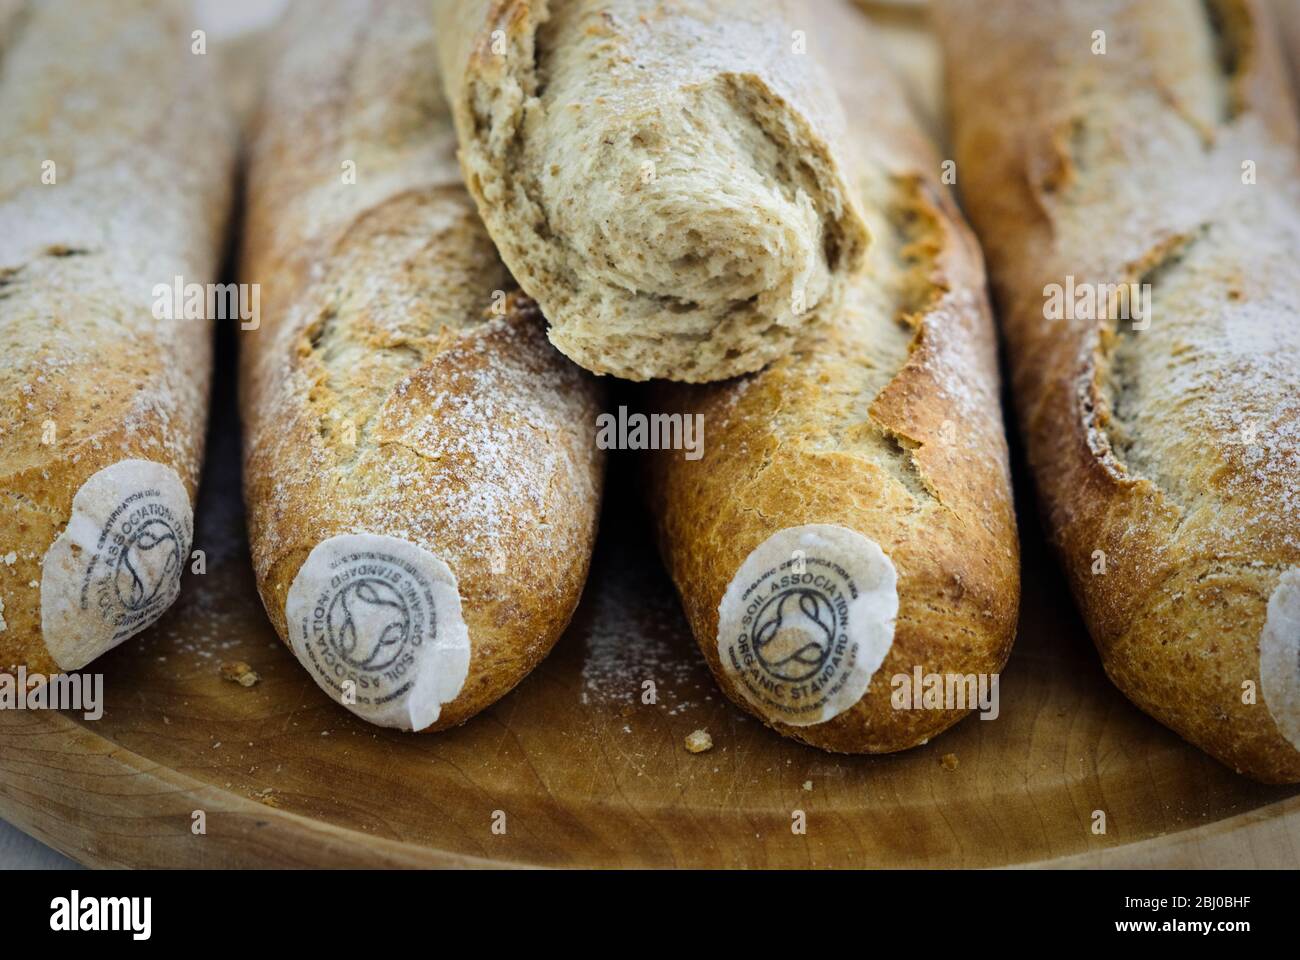 Pile of stoneground wholemeal organic baguettes on woden board - Stock Photo